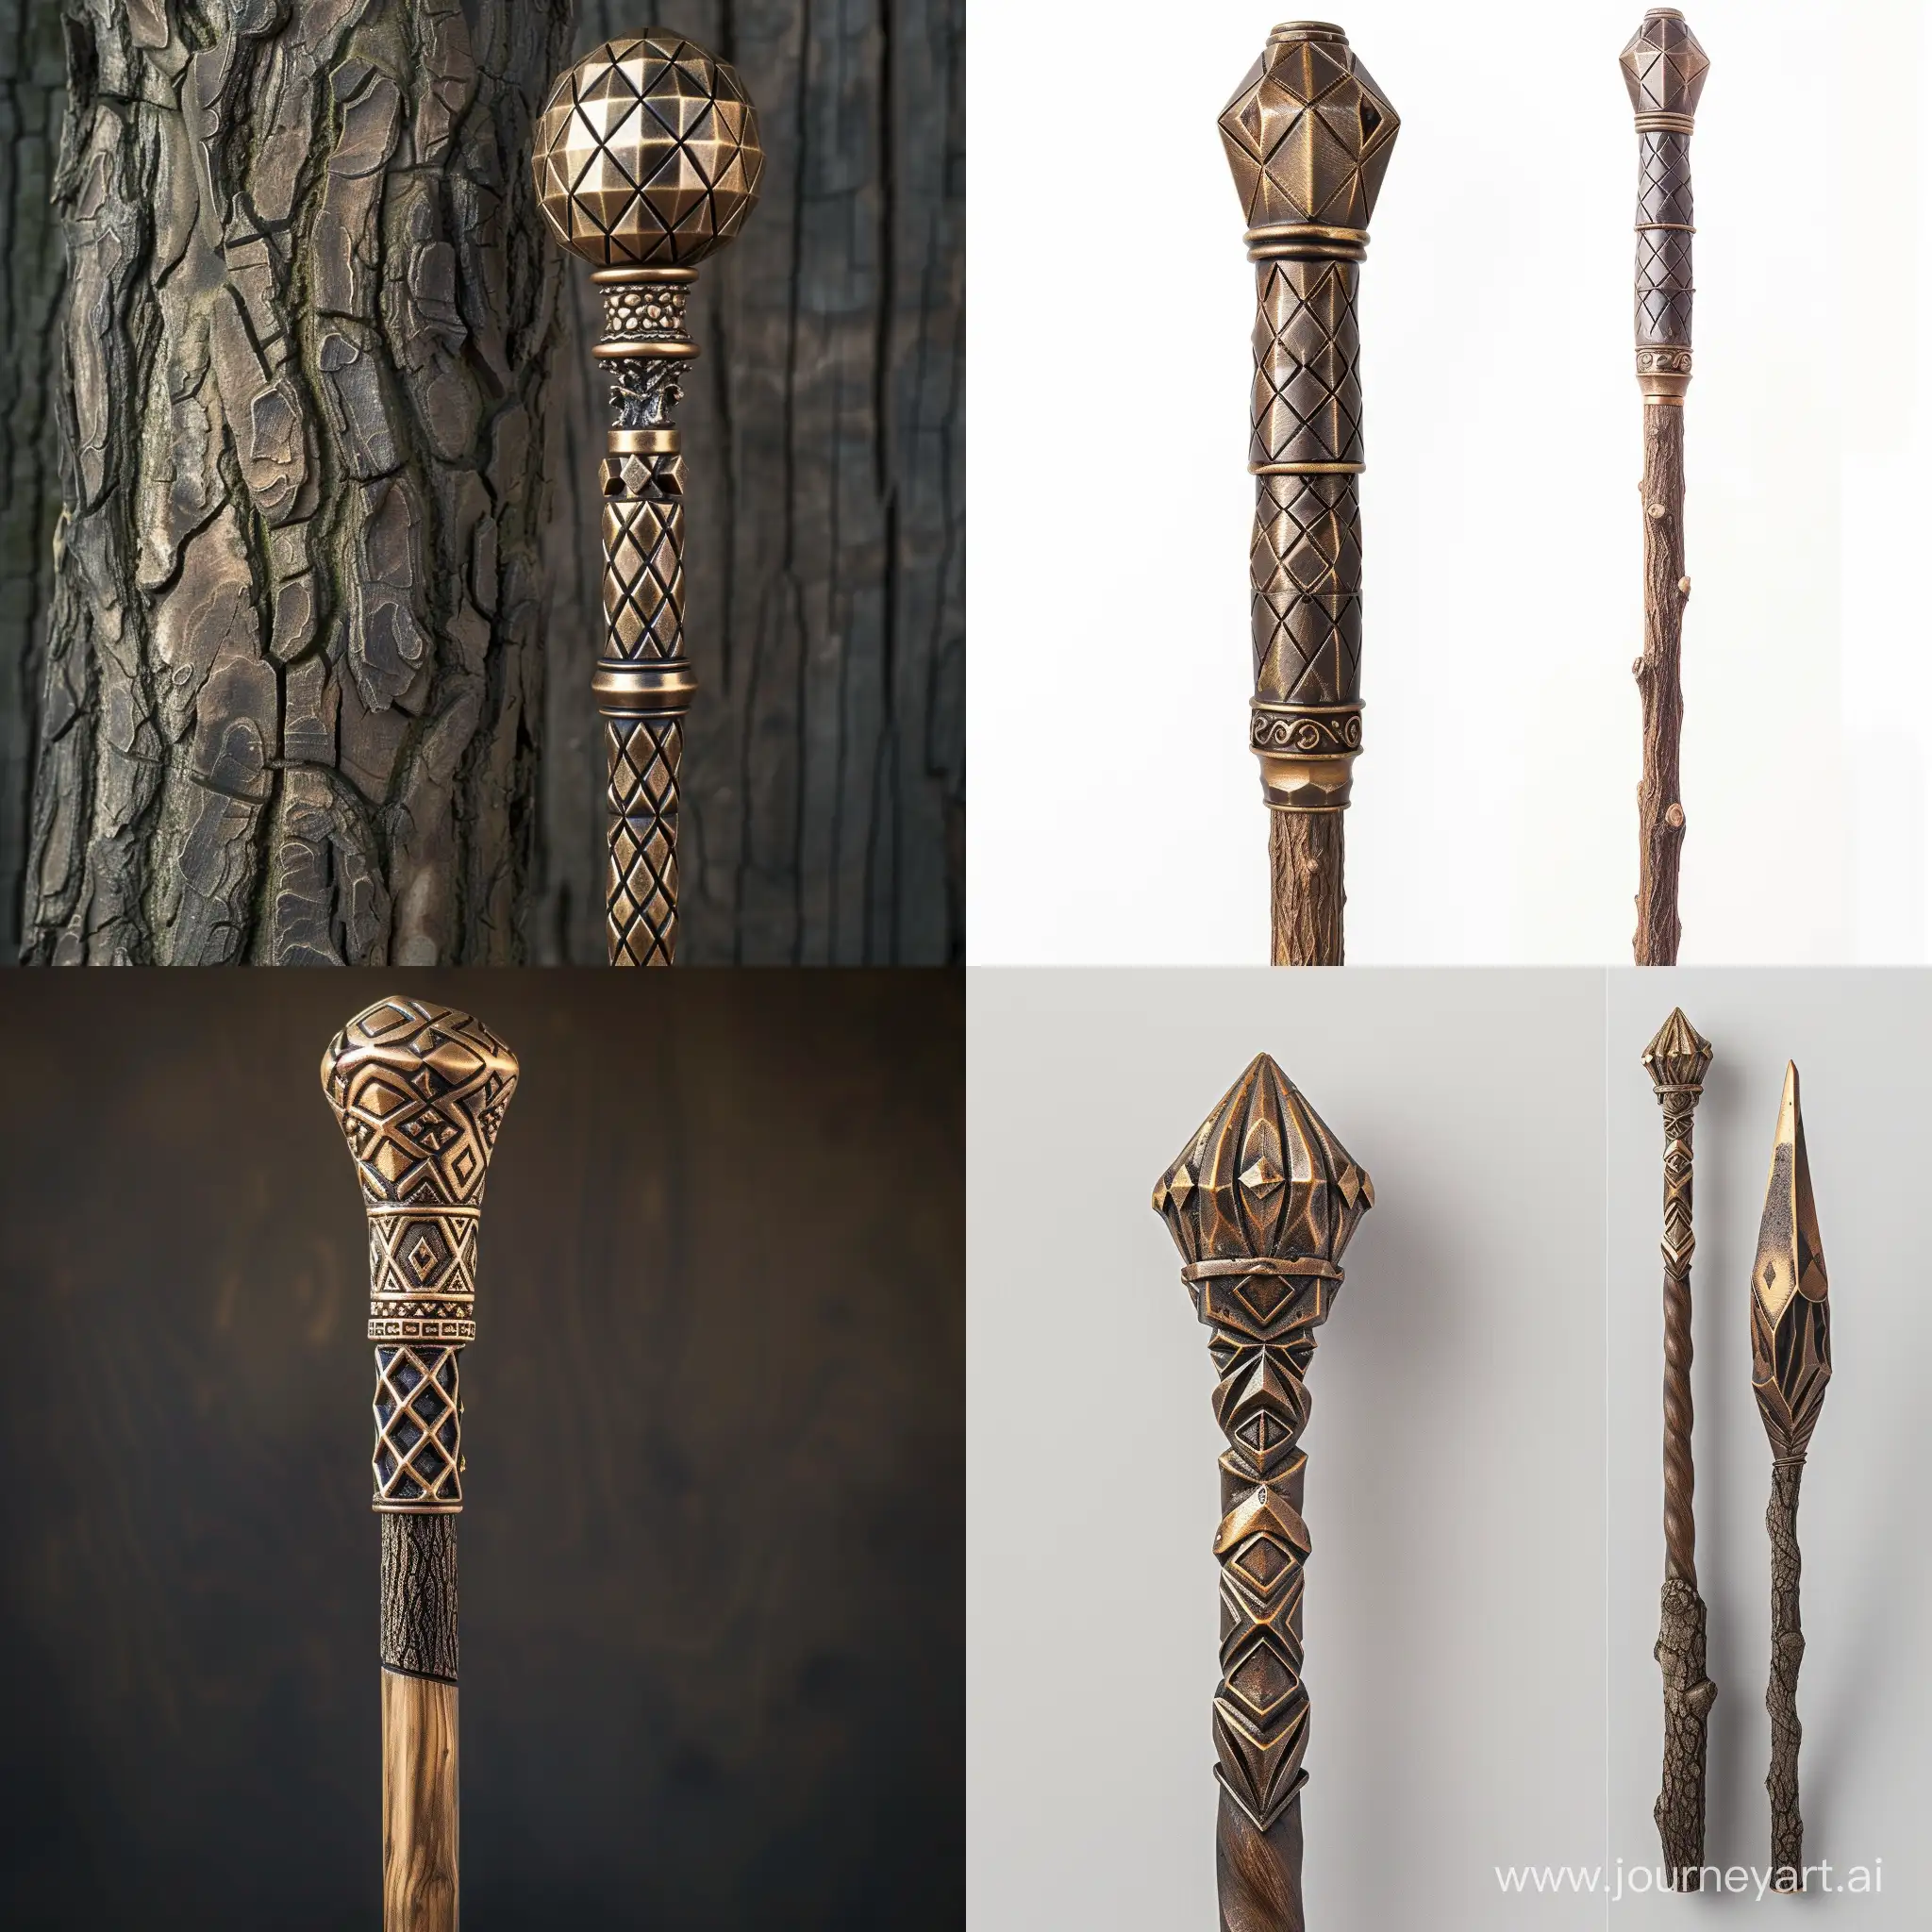 A fantasy-style cane with geometric decor, similar to the architecture of dwarves, the head of the cane is made of bronze, the tree of the shaft is oak, HD, detailed